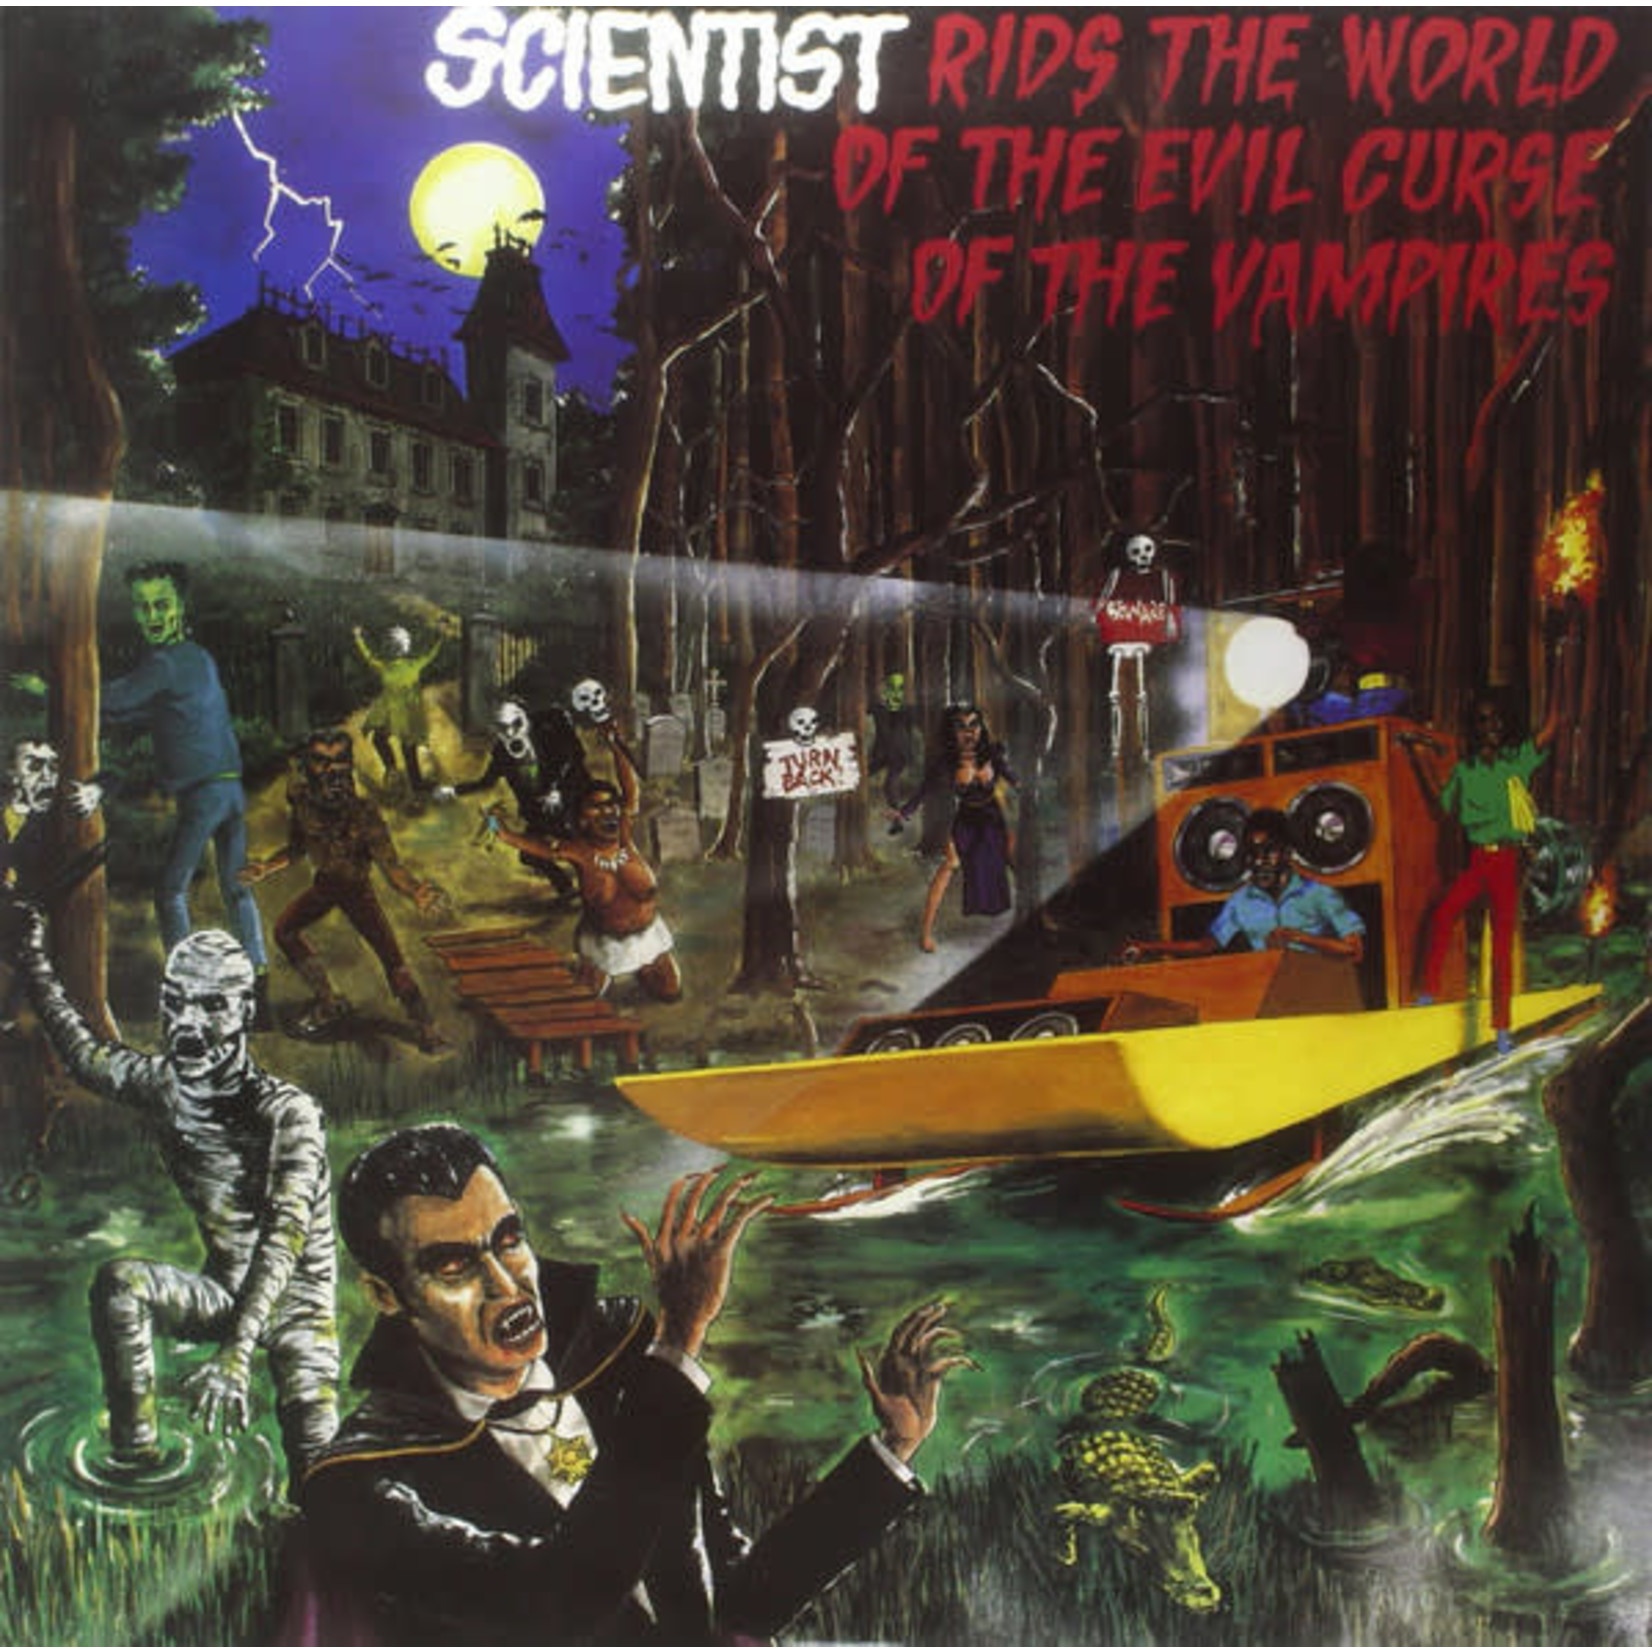 [New] Scientist - Rids the World Of the Evil Curse Of the Vampires